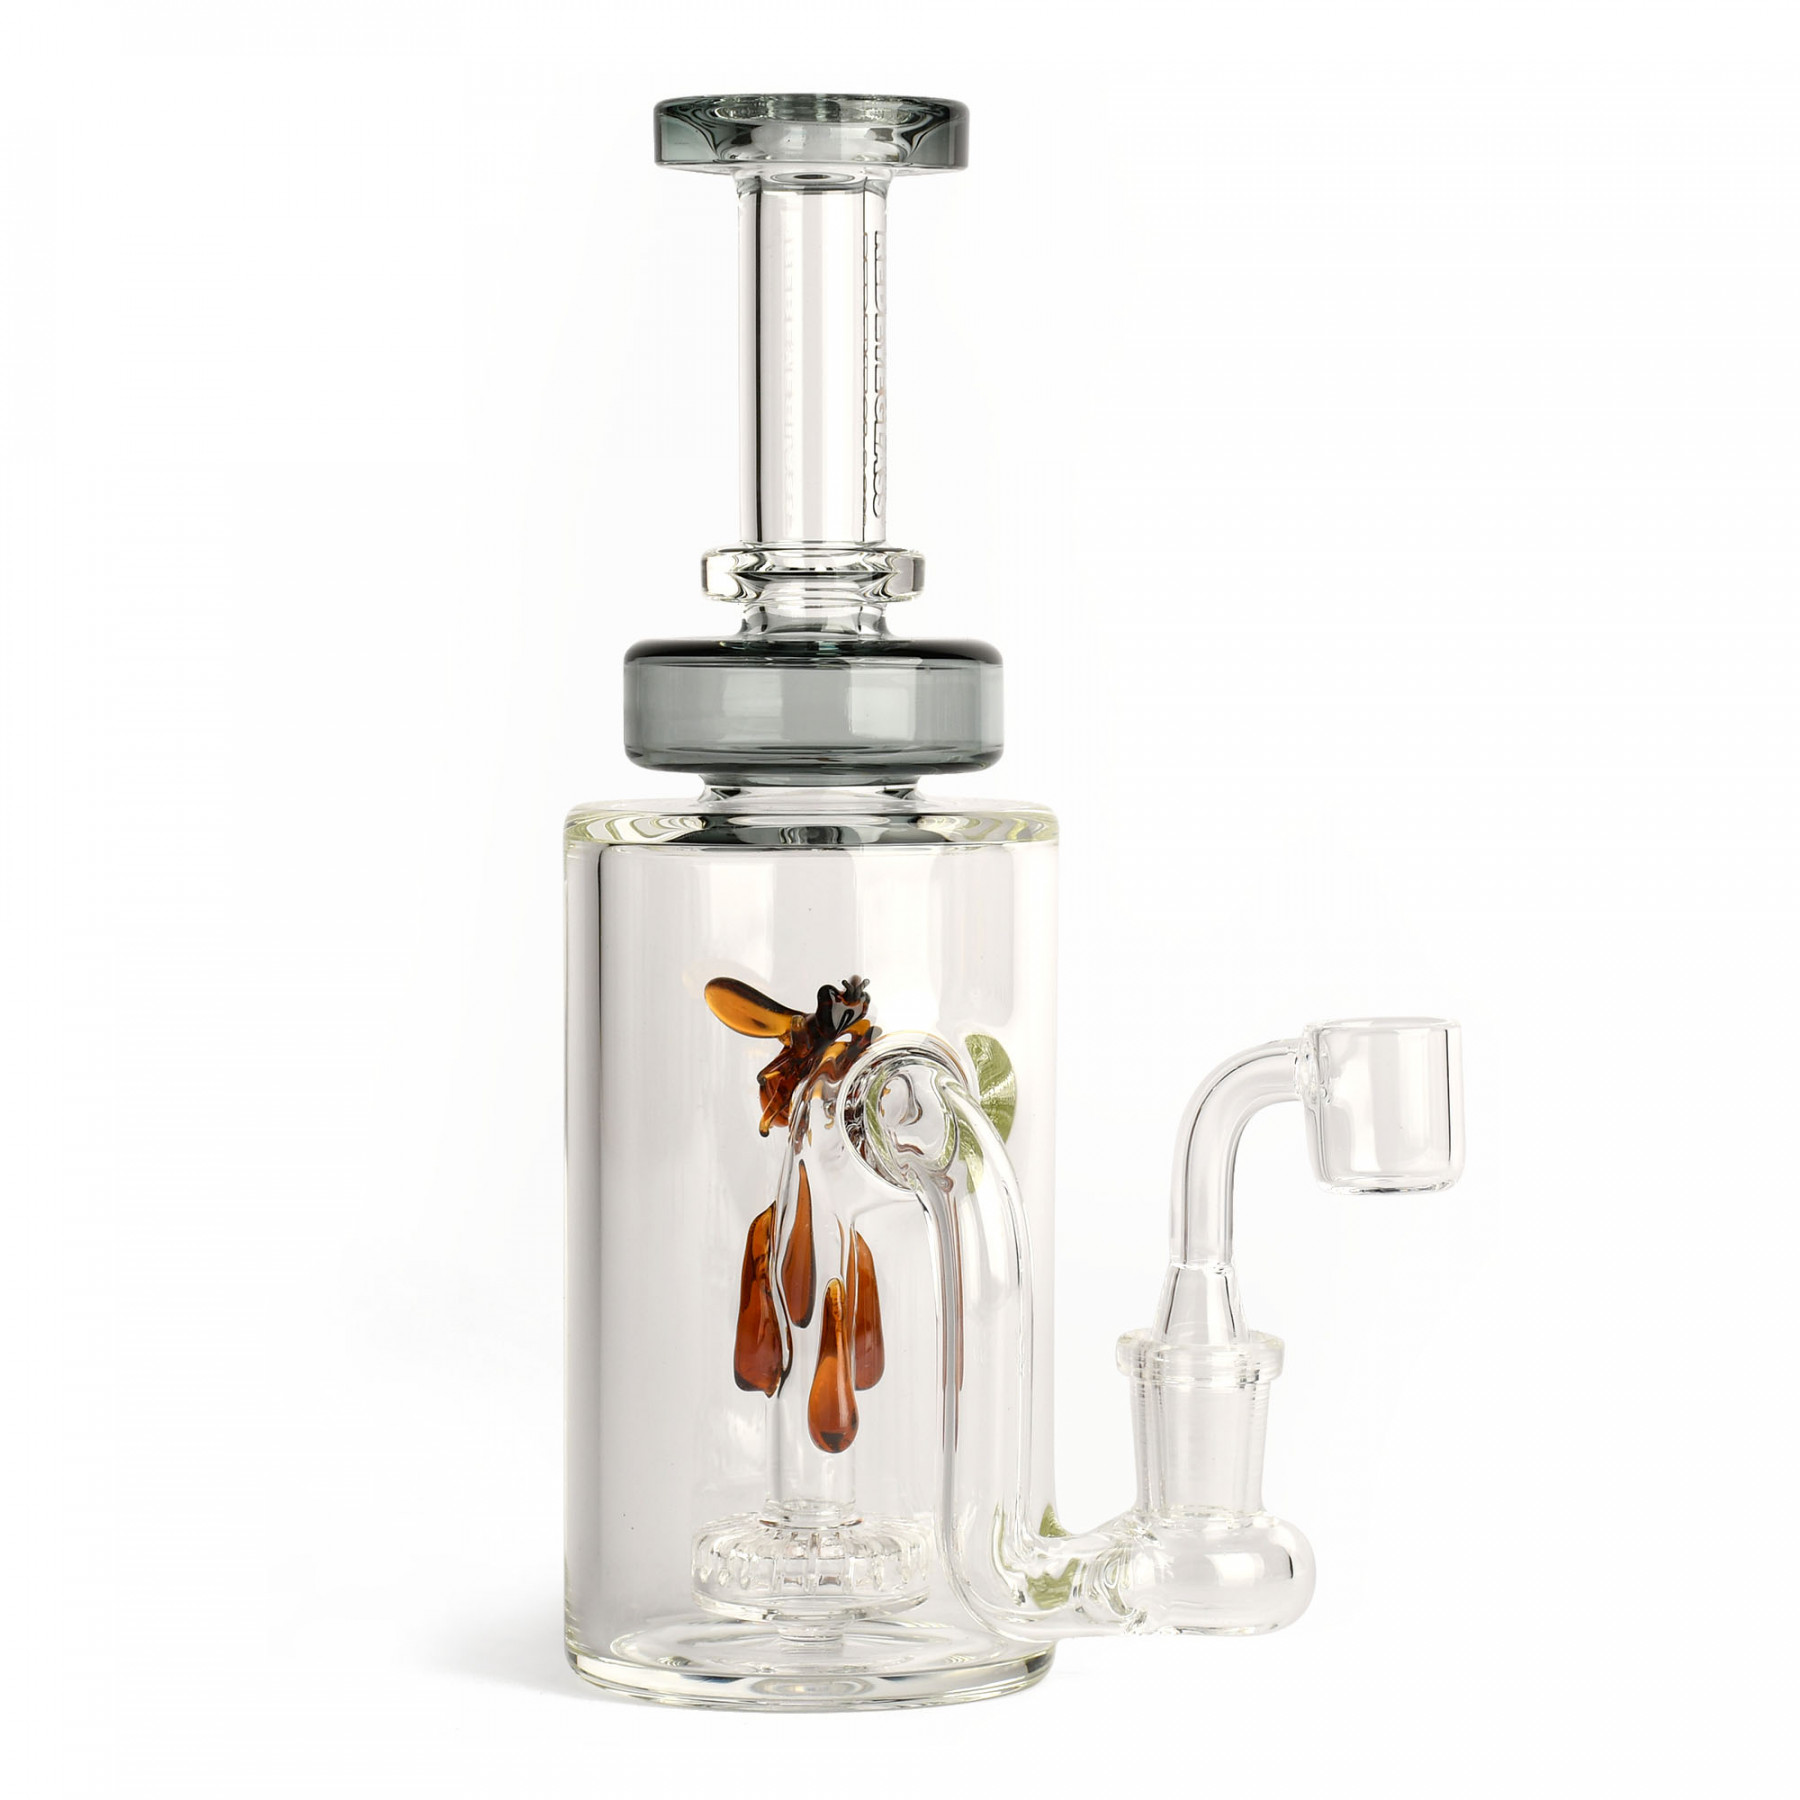 8.5" Apiary Concentrate Rig